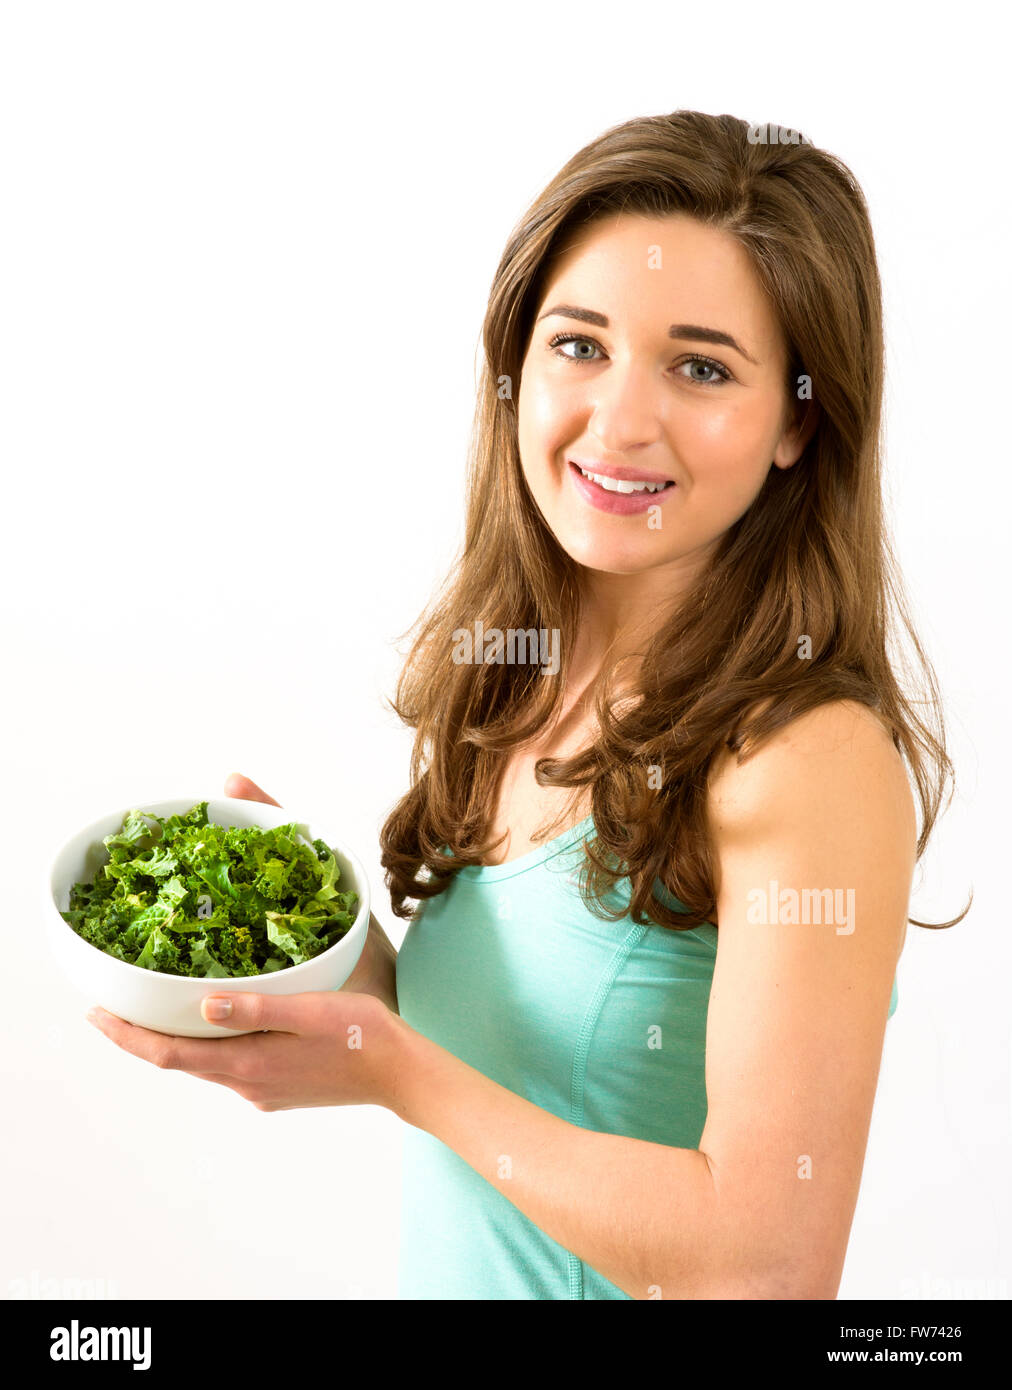 Young woman with bowl of kale Stock Photo